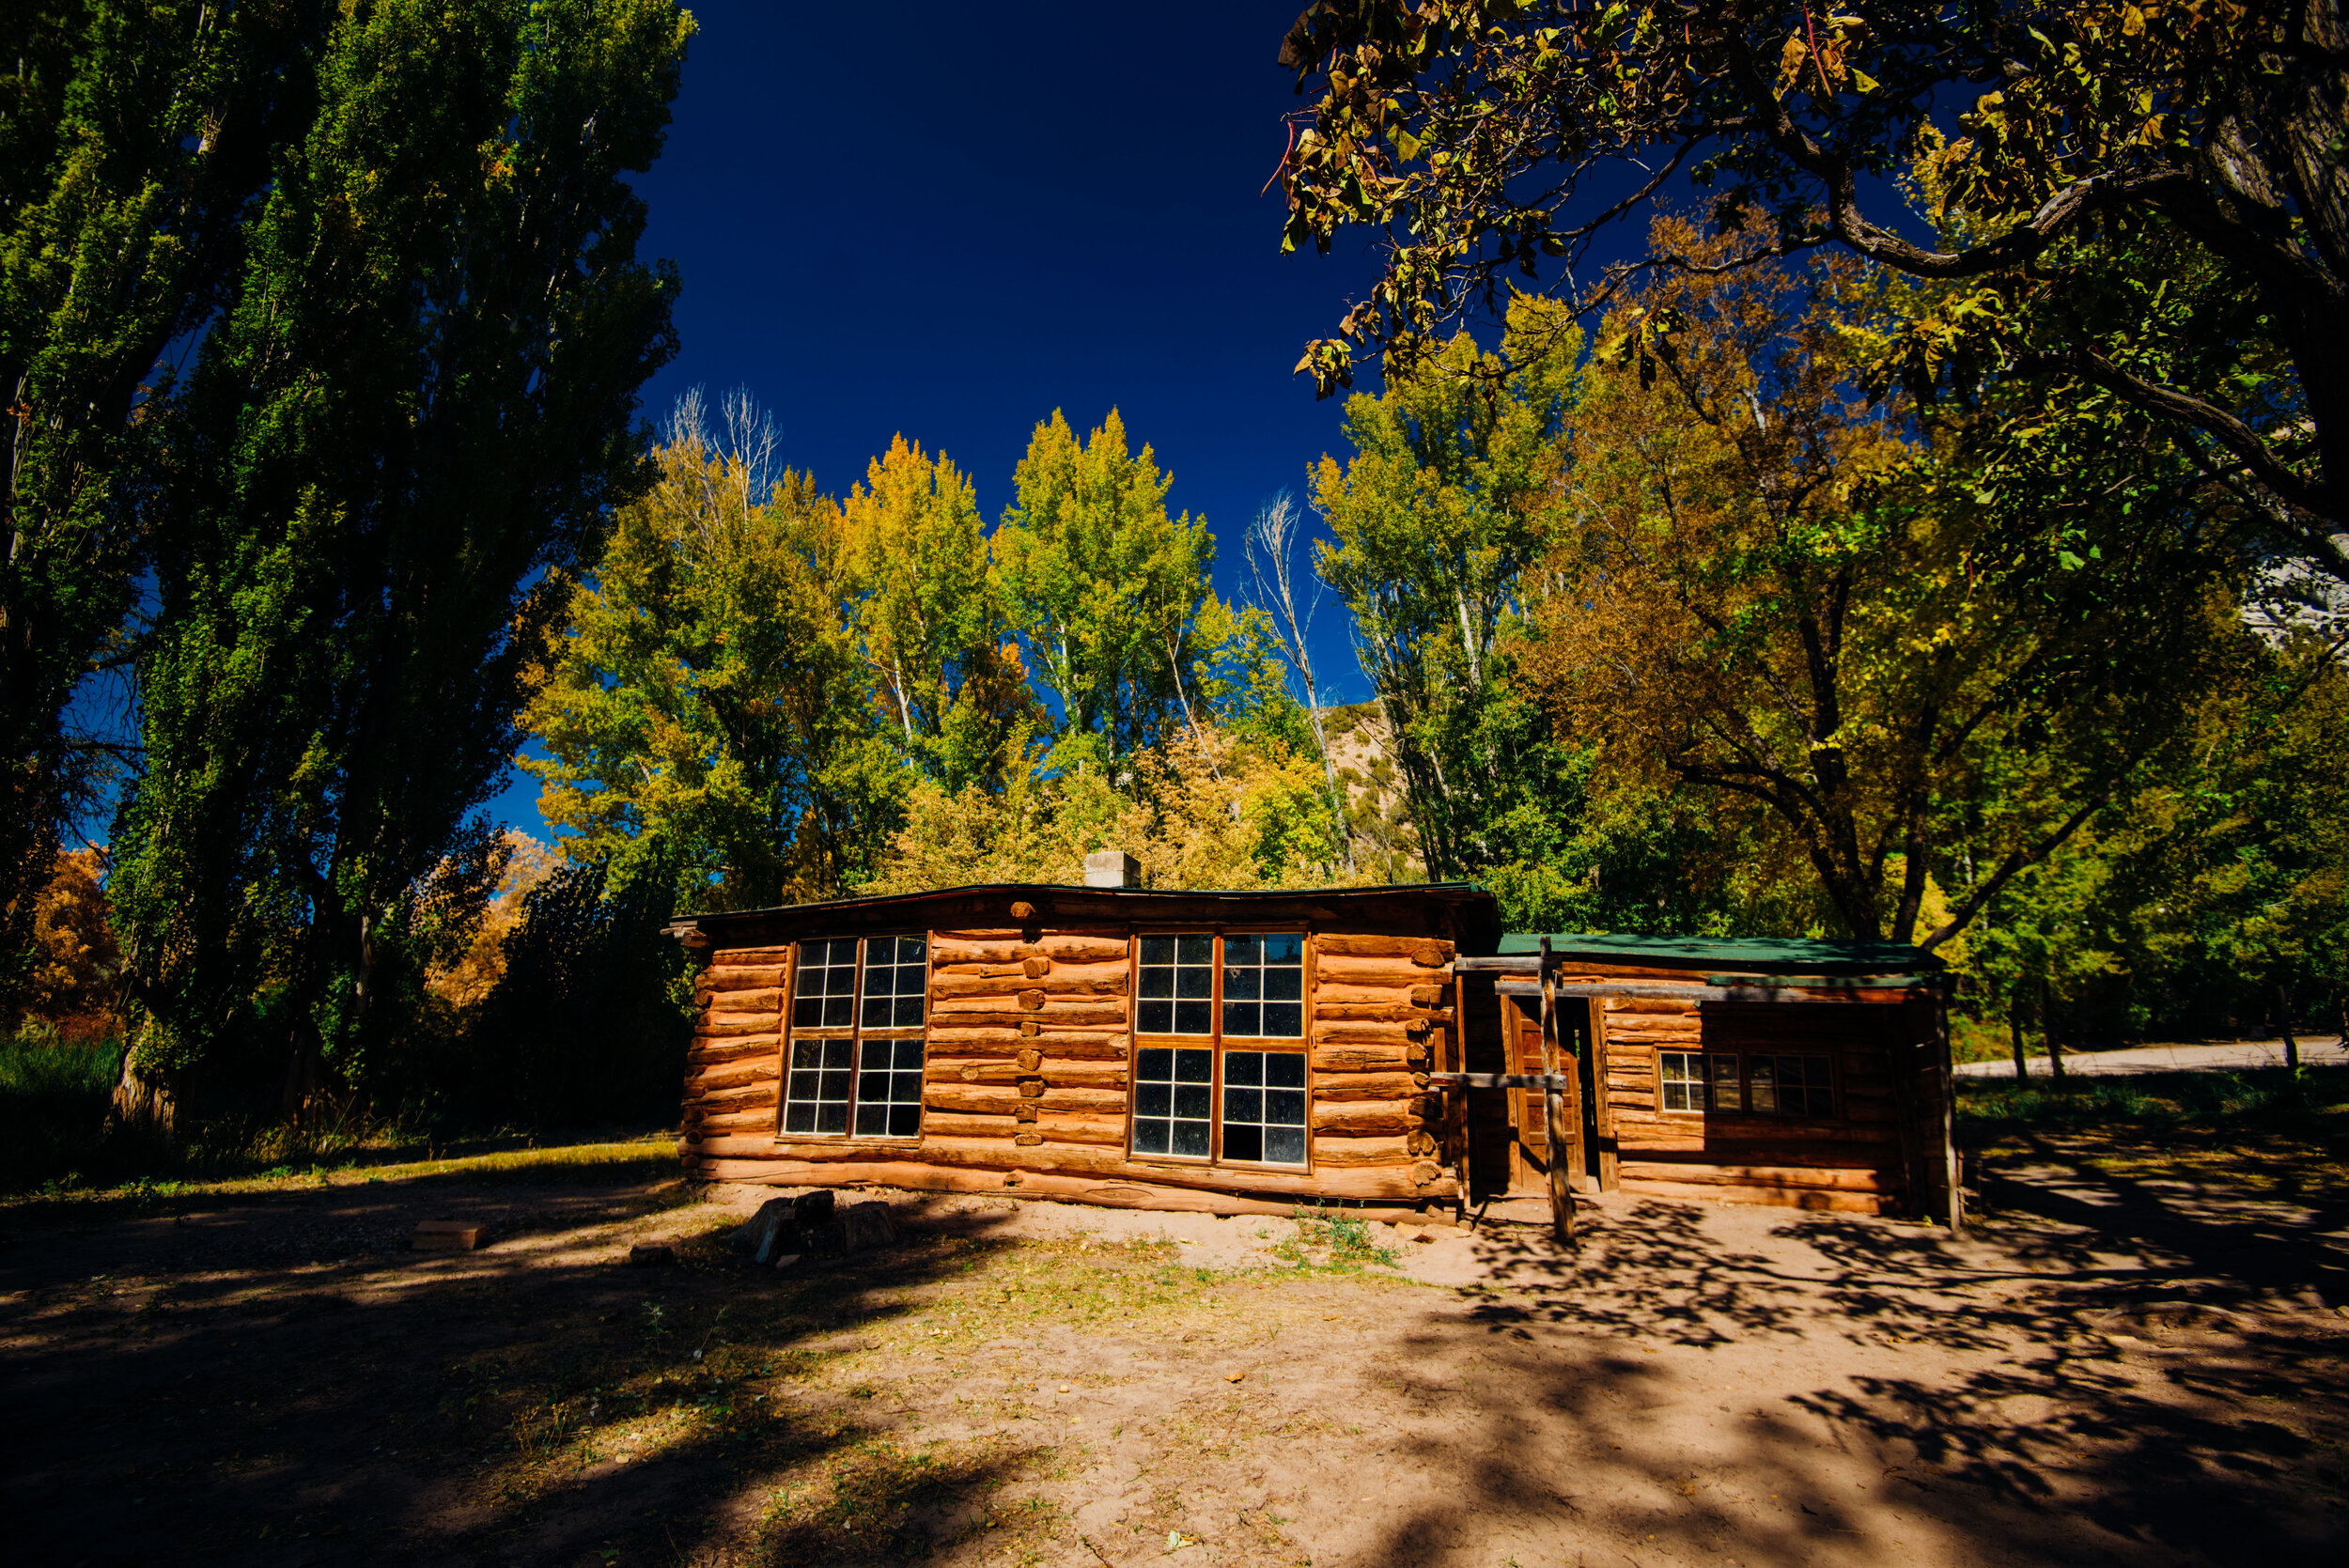 This cabin doesn’t look like much but it used to be the home of the badass Josie Morris, who homesteaded here almost her whole life by herself in what’s now Dinosaur National Monument.